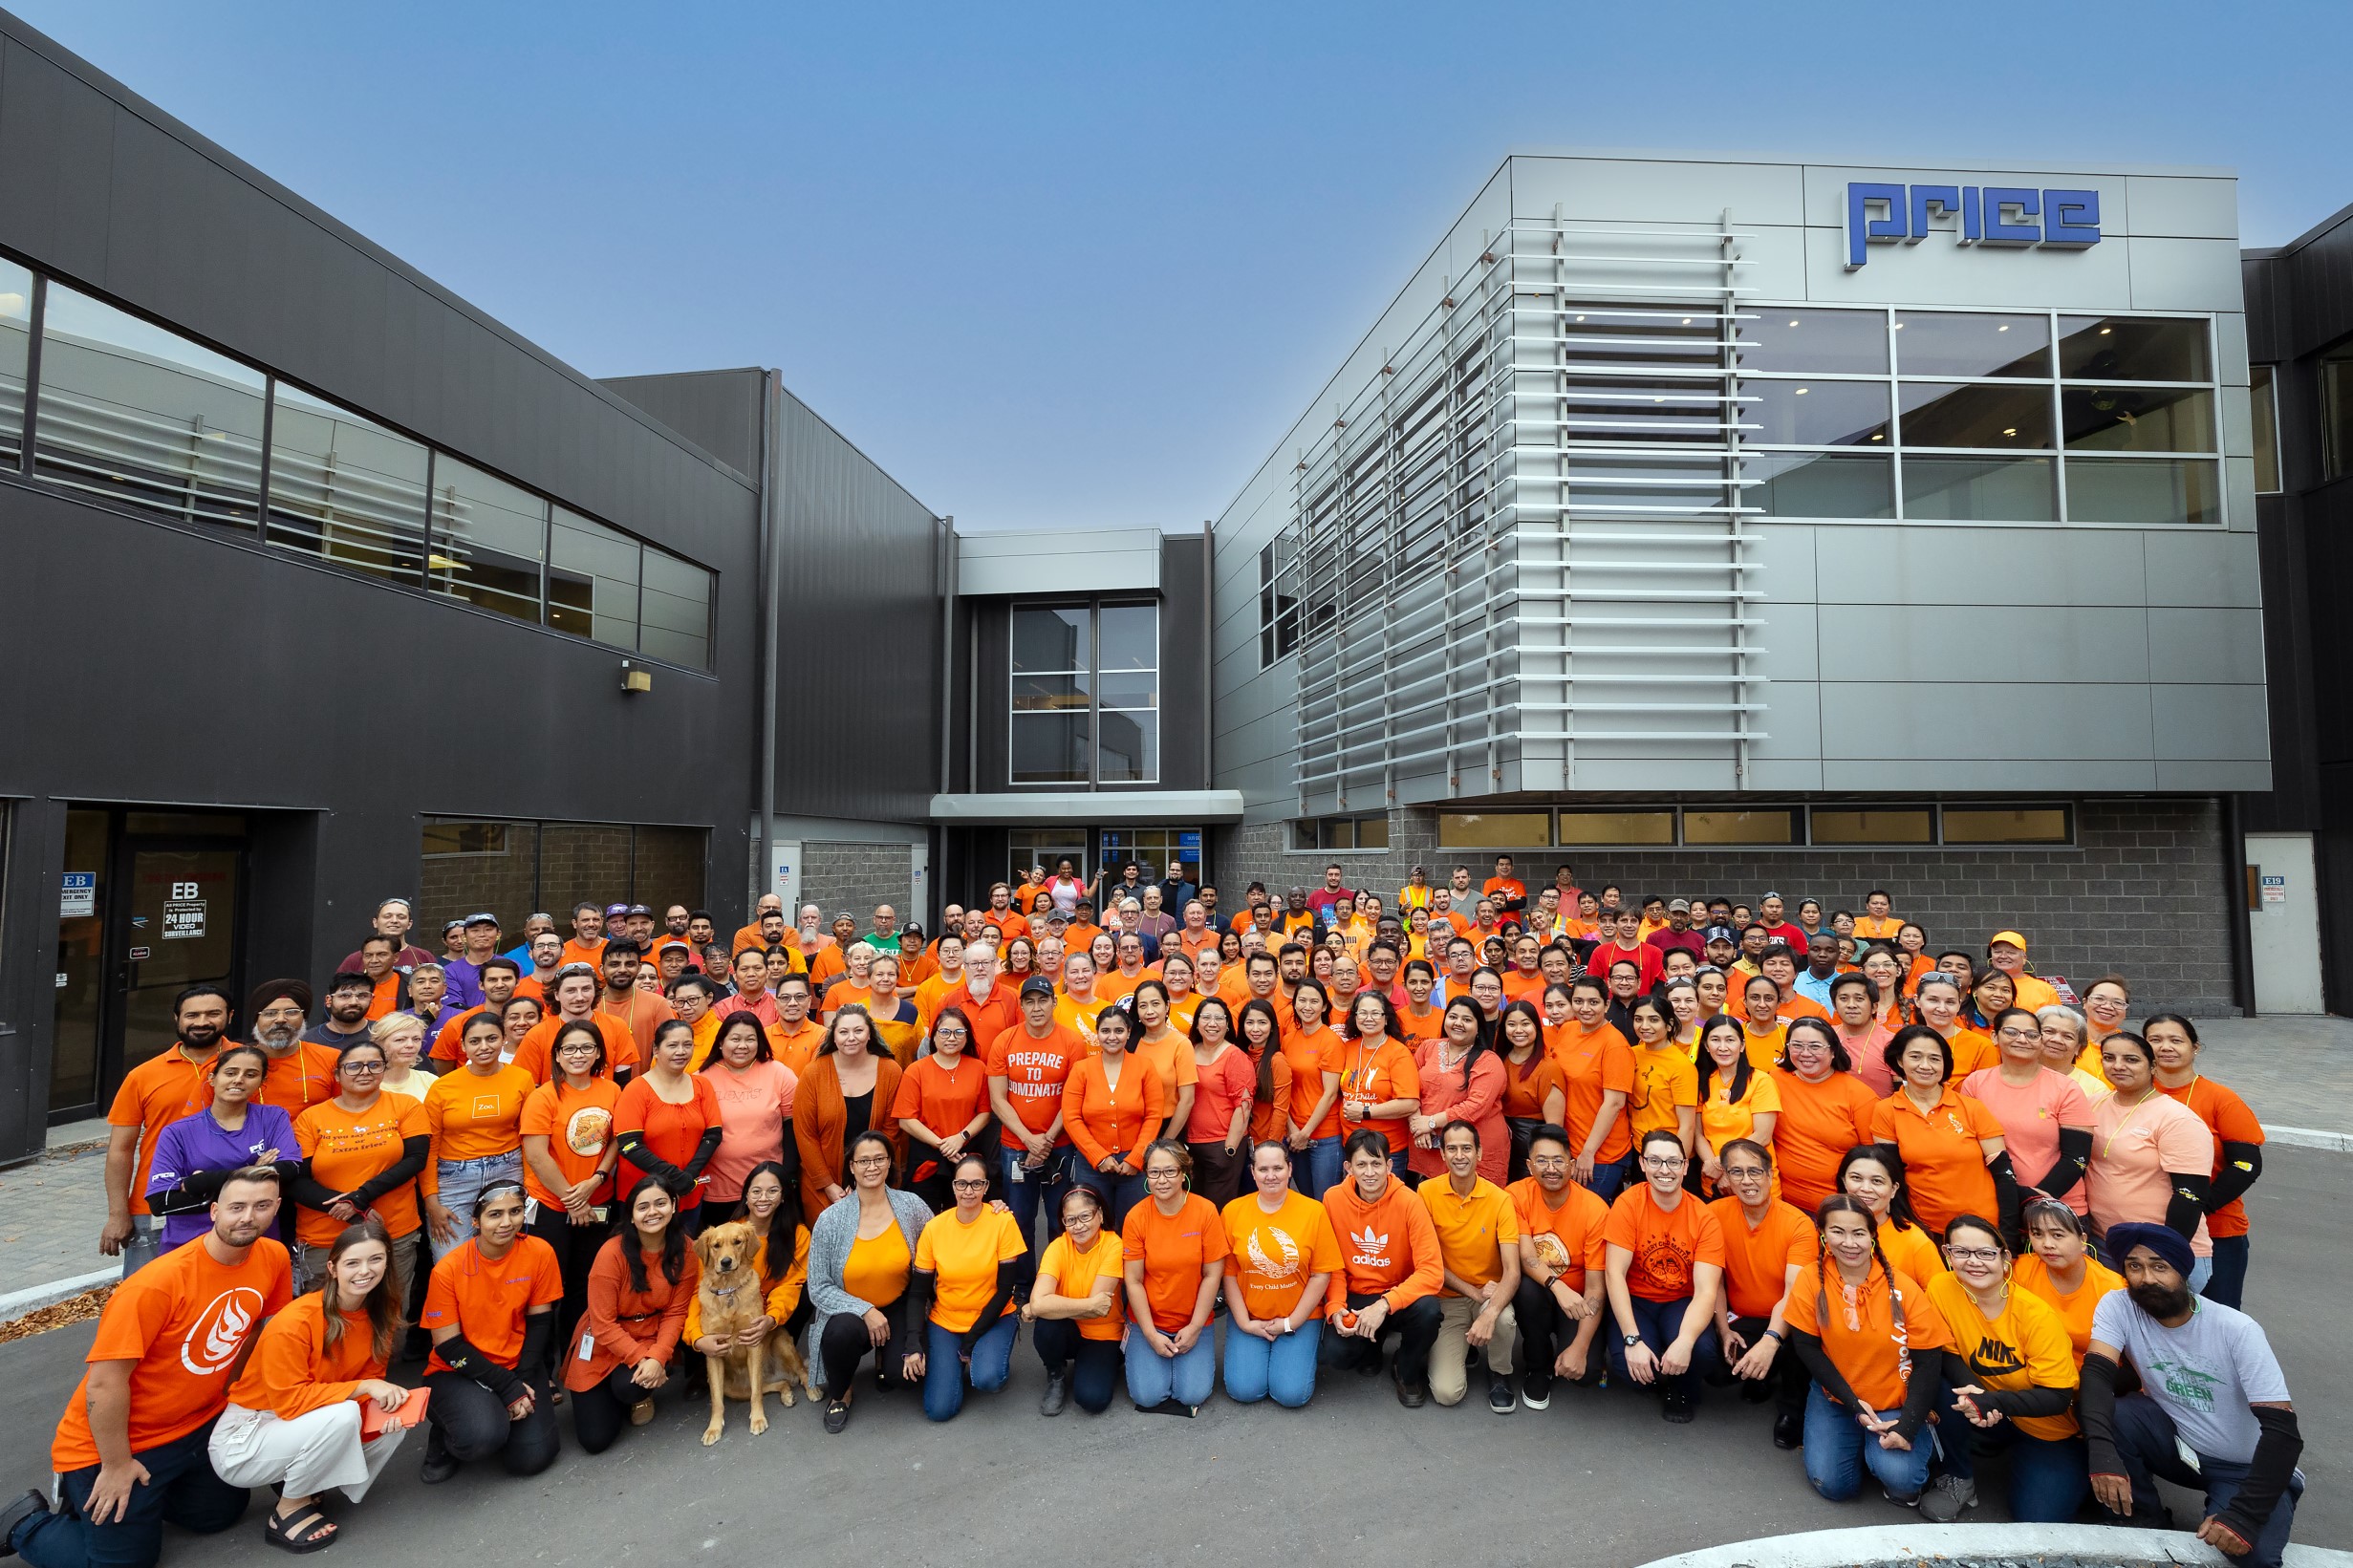 The Price team, wearing orange shirts, outside the Price building